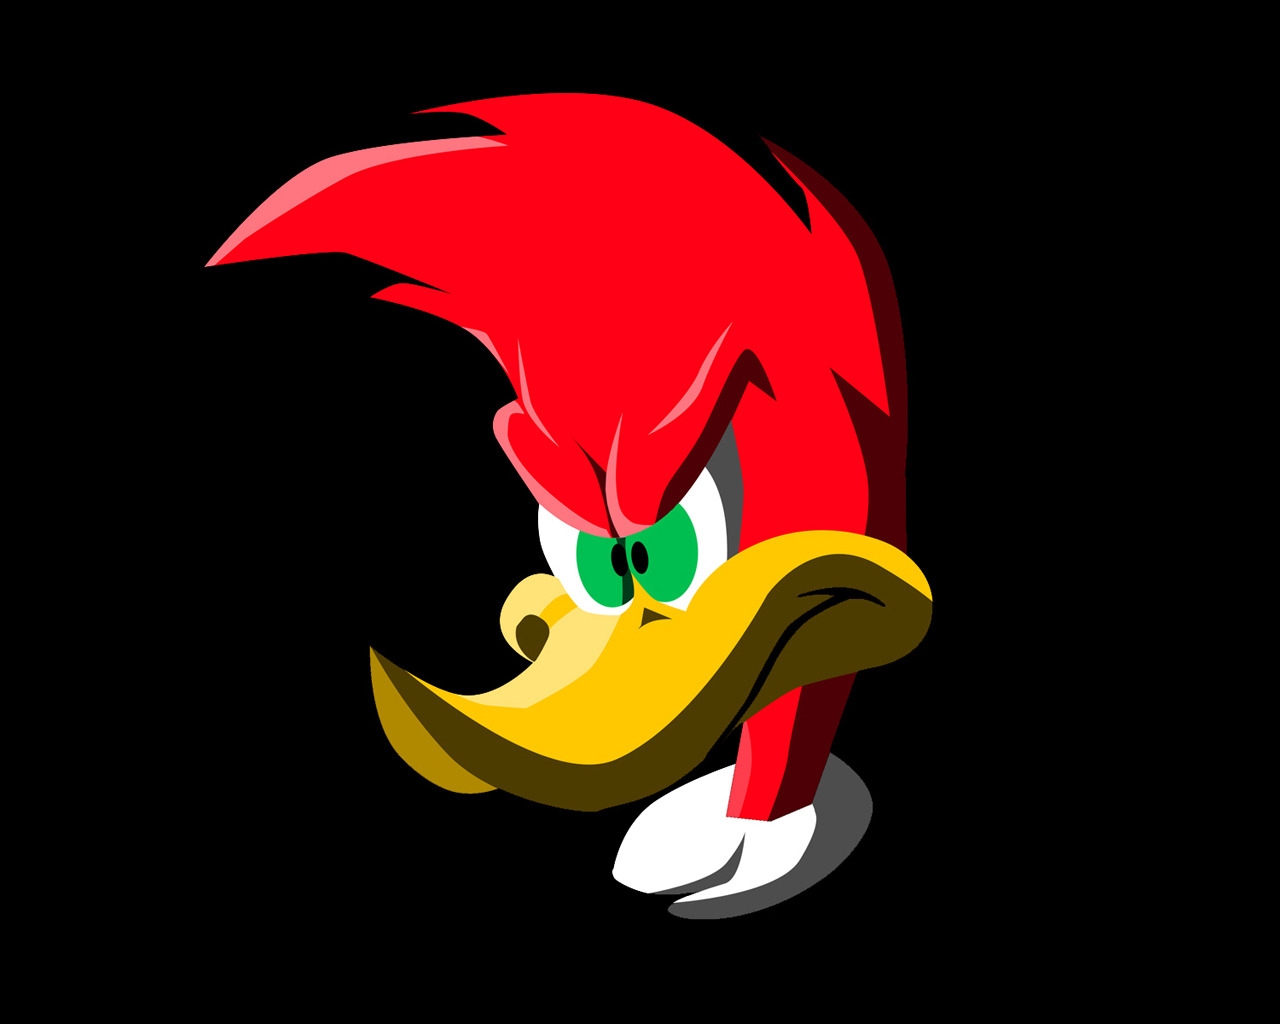 Woody Woodpecker for 1280 x 1024 resolution